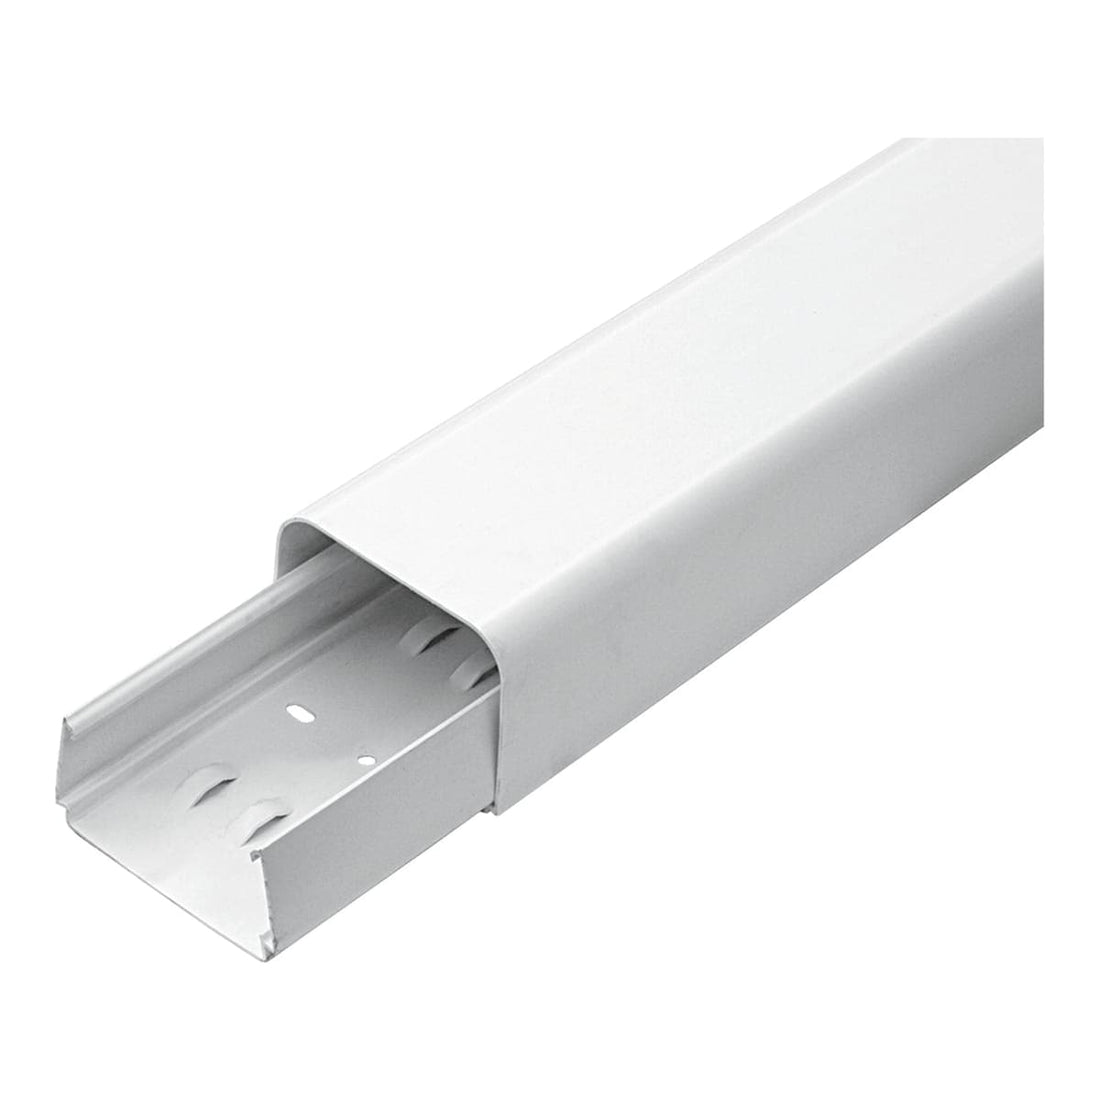 U-SHAPED CLIMATE DUCT 90X65 MM WHITE - best price from Maltashopper.com BR420004282